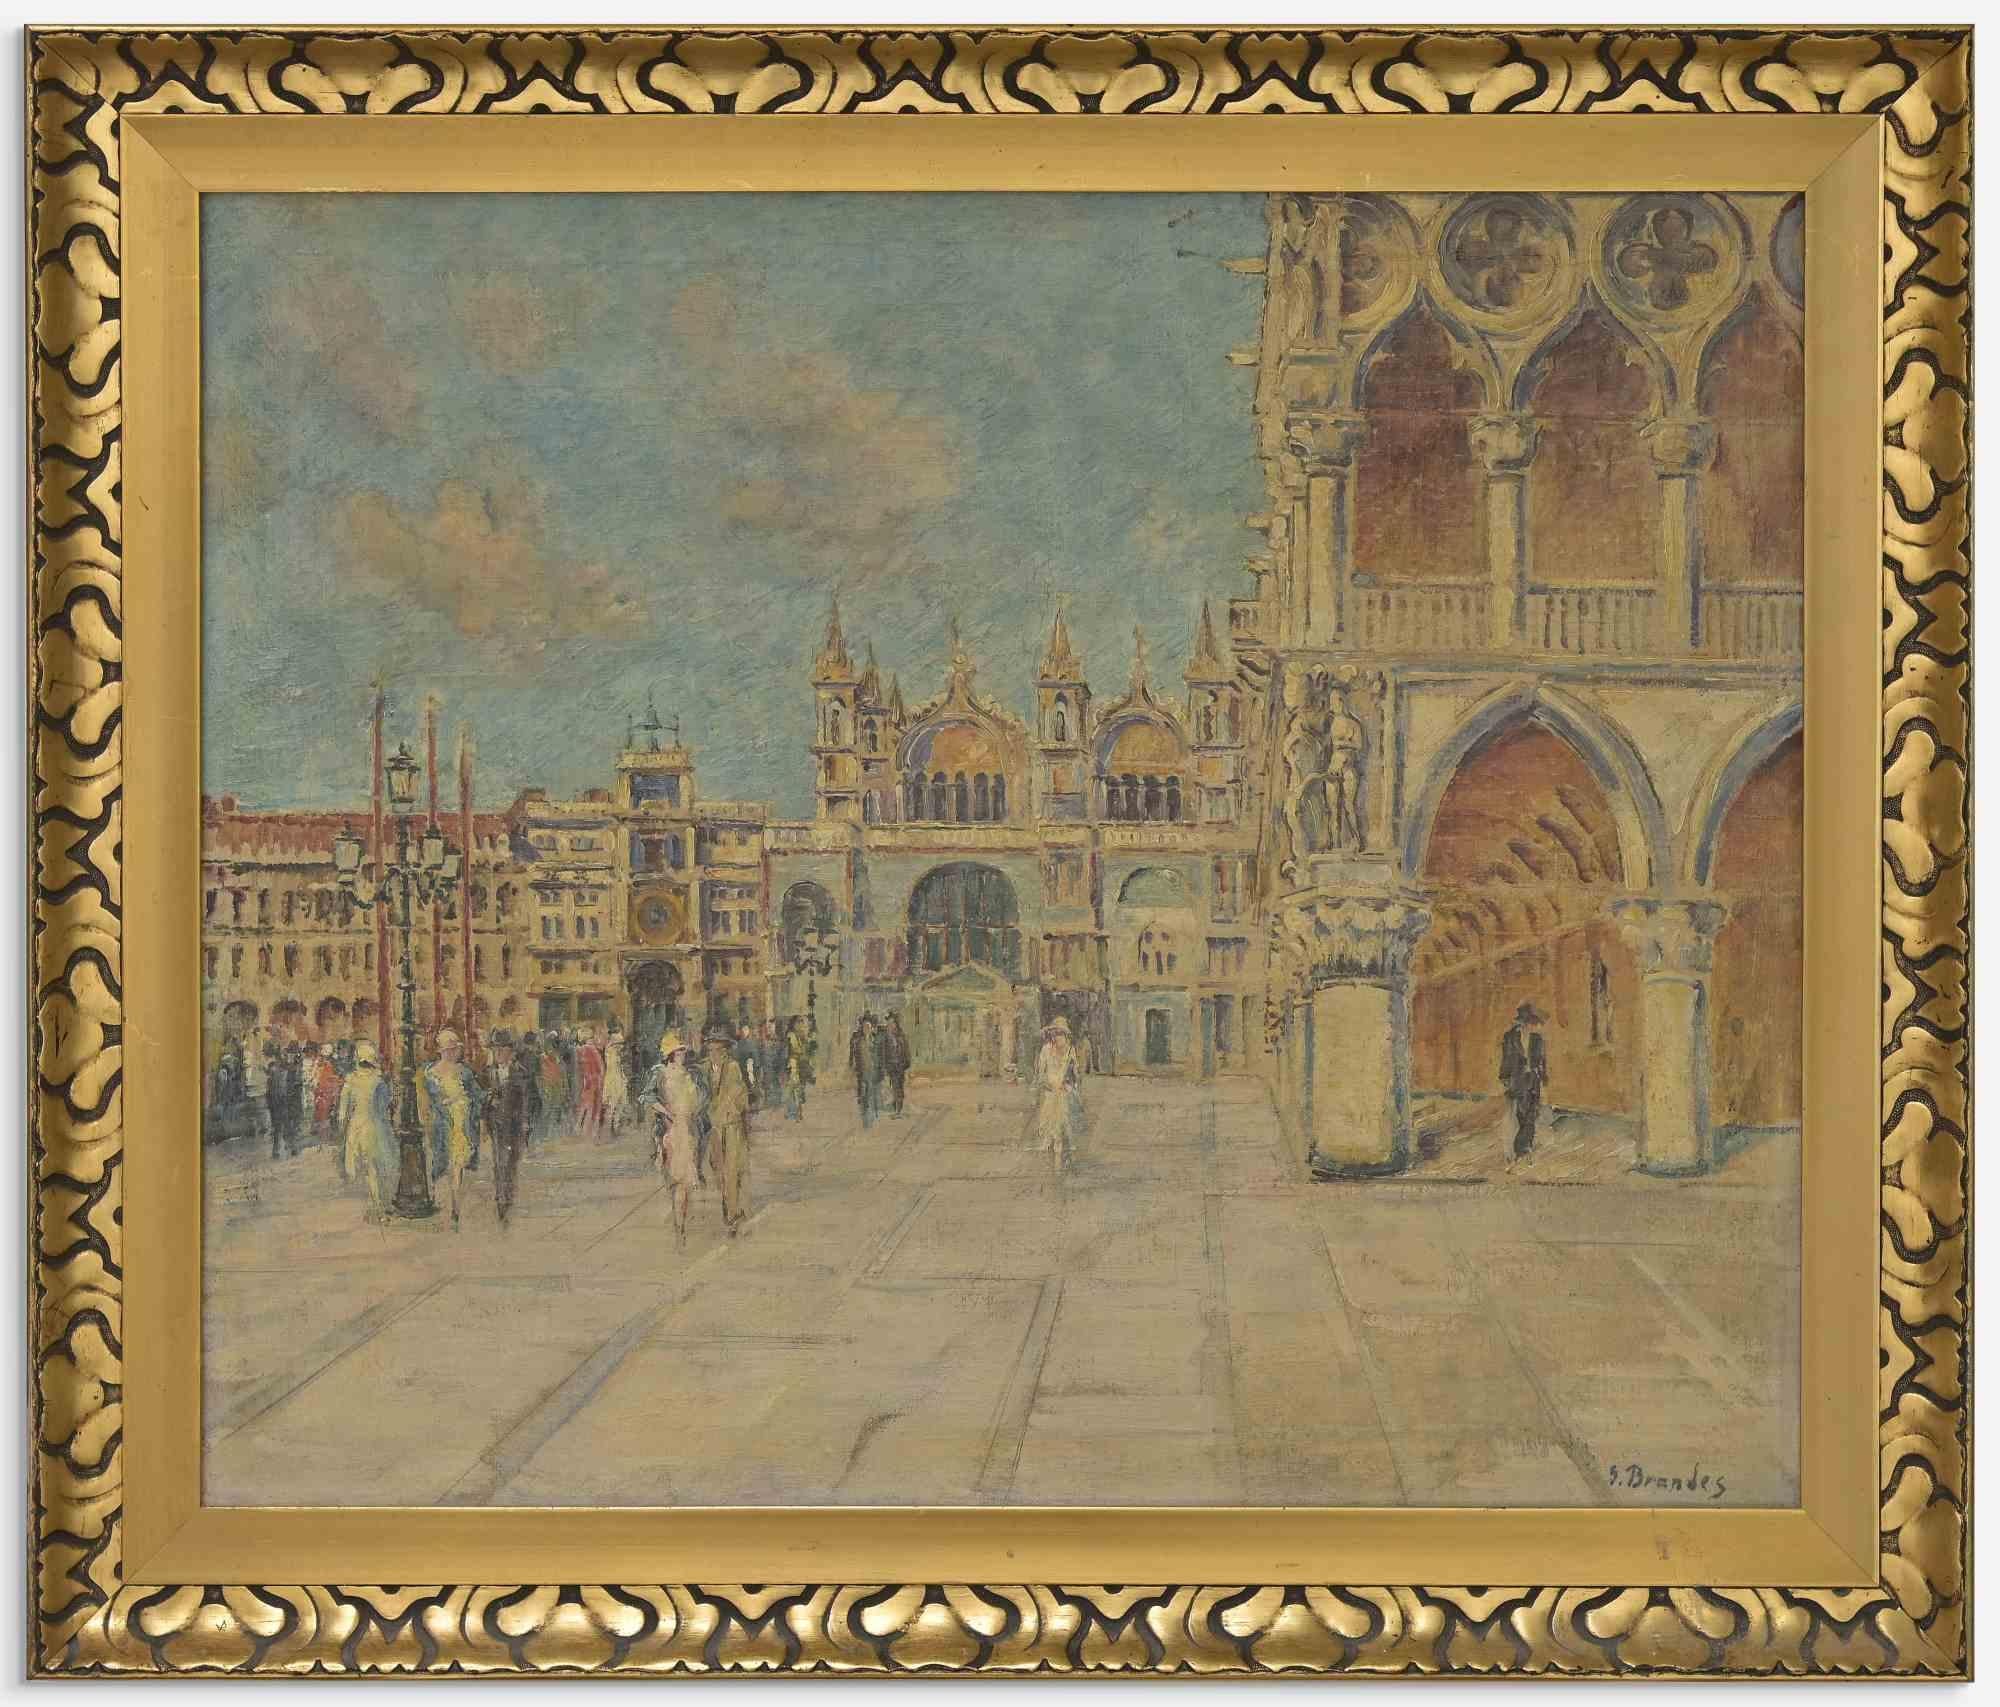 View of St. Mark's Square and Doge's Palace in Venice is an artwork realized by Georg Brandes (1878 - 1952). 

Oil Painting, Early 20th Century.

56x68 cm; h70 x l82 with frame. 

Handsigned in the lower right margin.

Good condition.